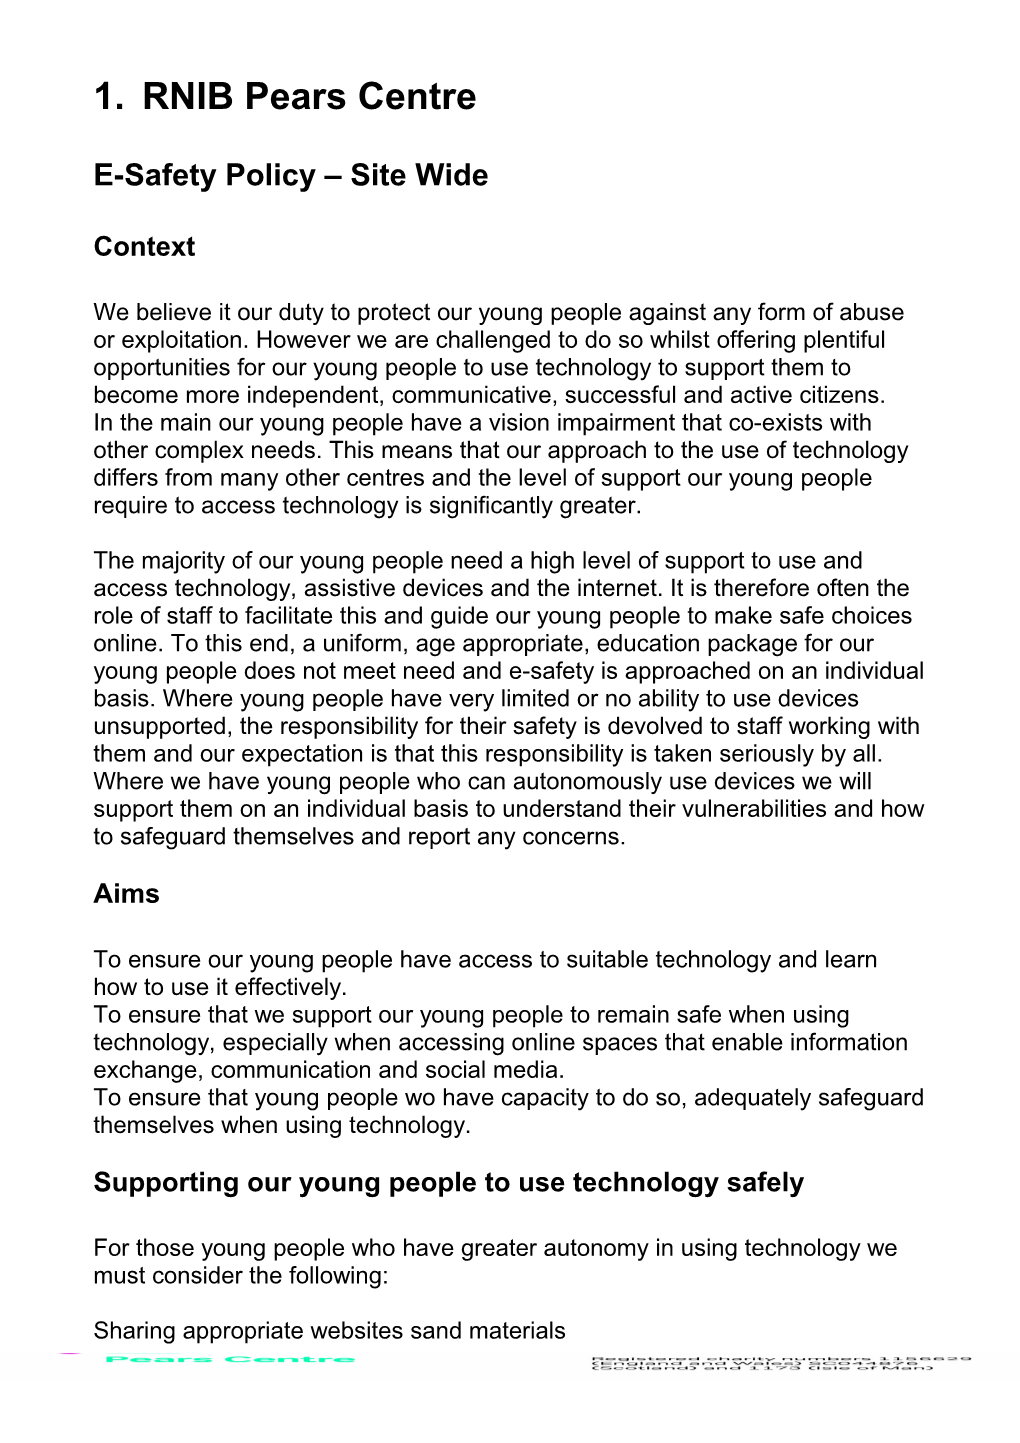 E-Safety Policy Site Wide